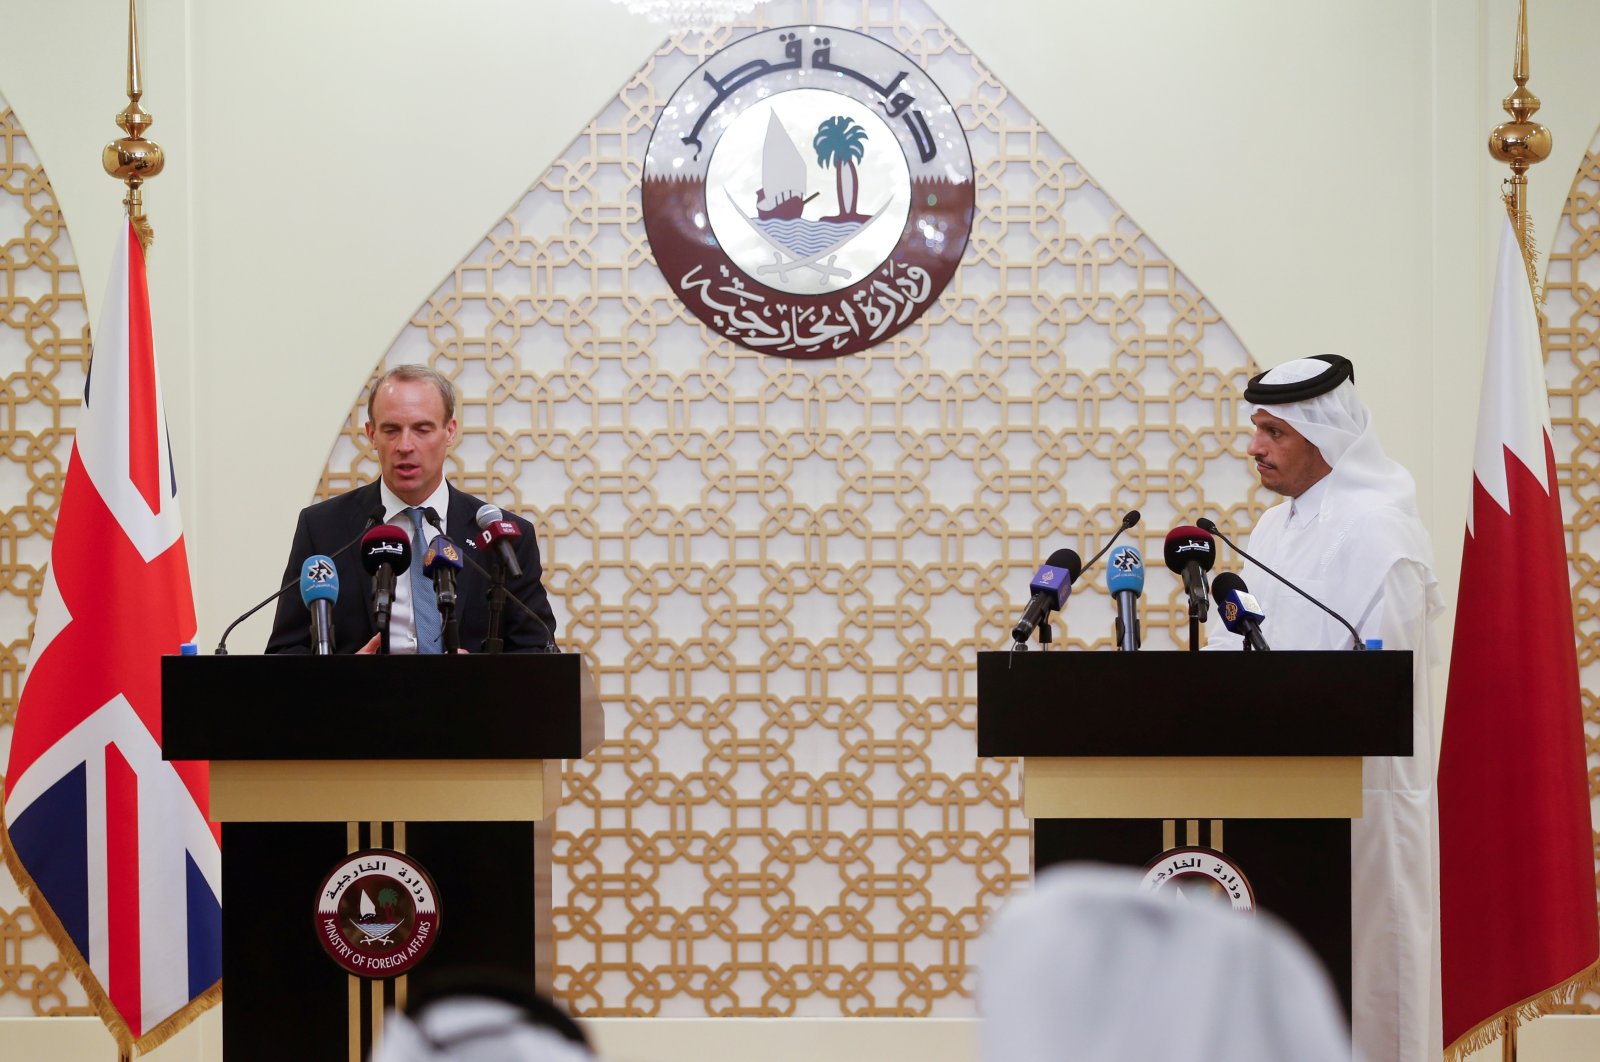 Qatari Foreign Minister Sheikh Mohammed bin Abdulrahman Al Thani and Britain's Foreign Secretary Dominic Raab hold a joint news conference in Doha, Qatar, Sept. 2, 2021. (Reuters Photo)